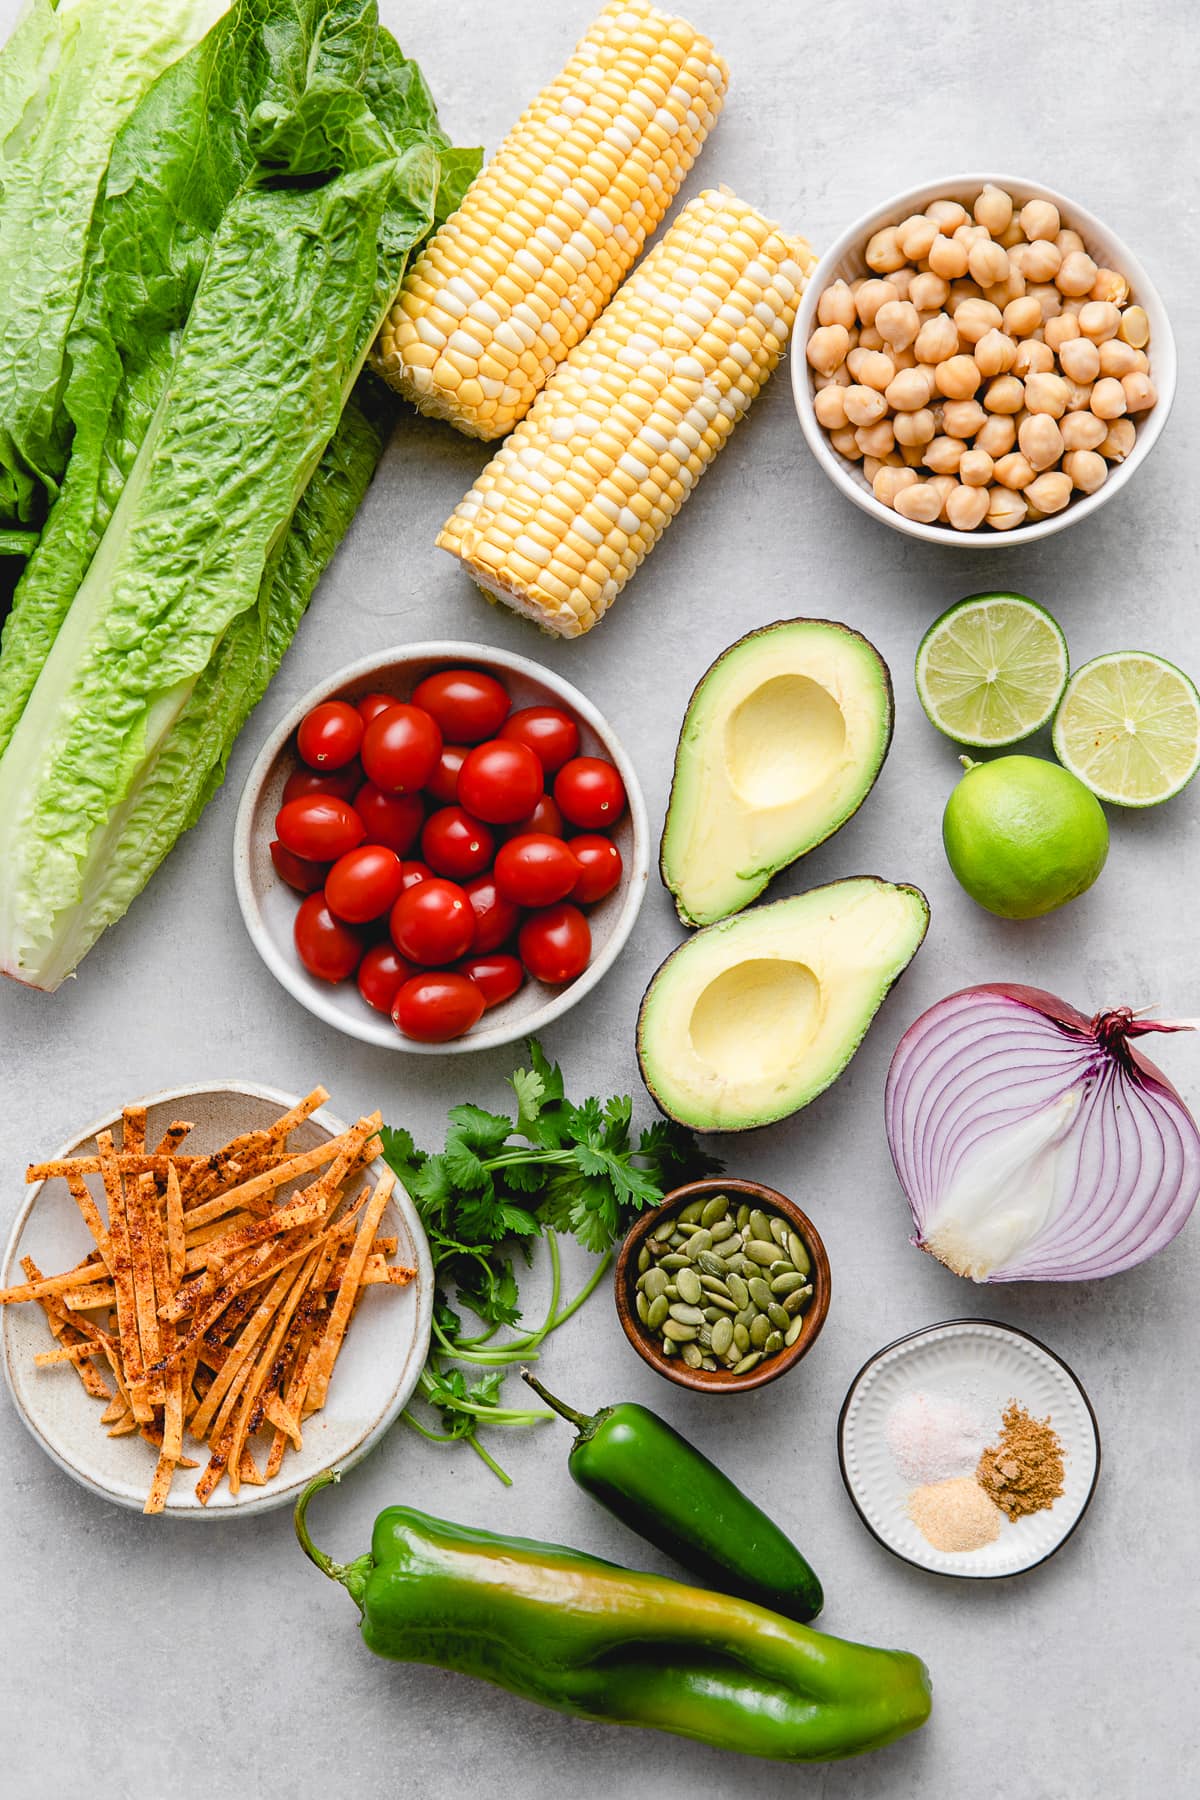 top down view of ingredients used to make southwest chickpea salad with avocado dressing.